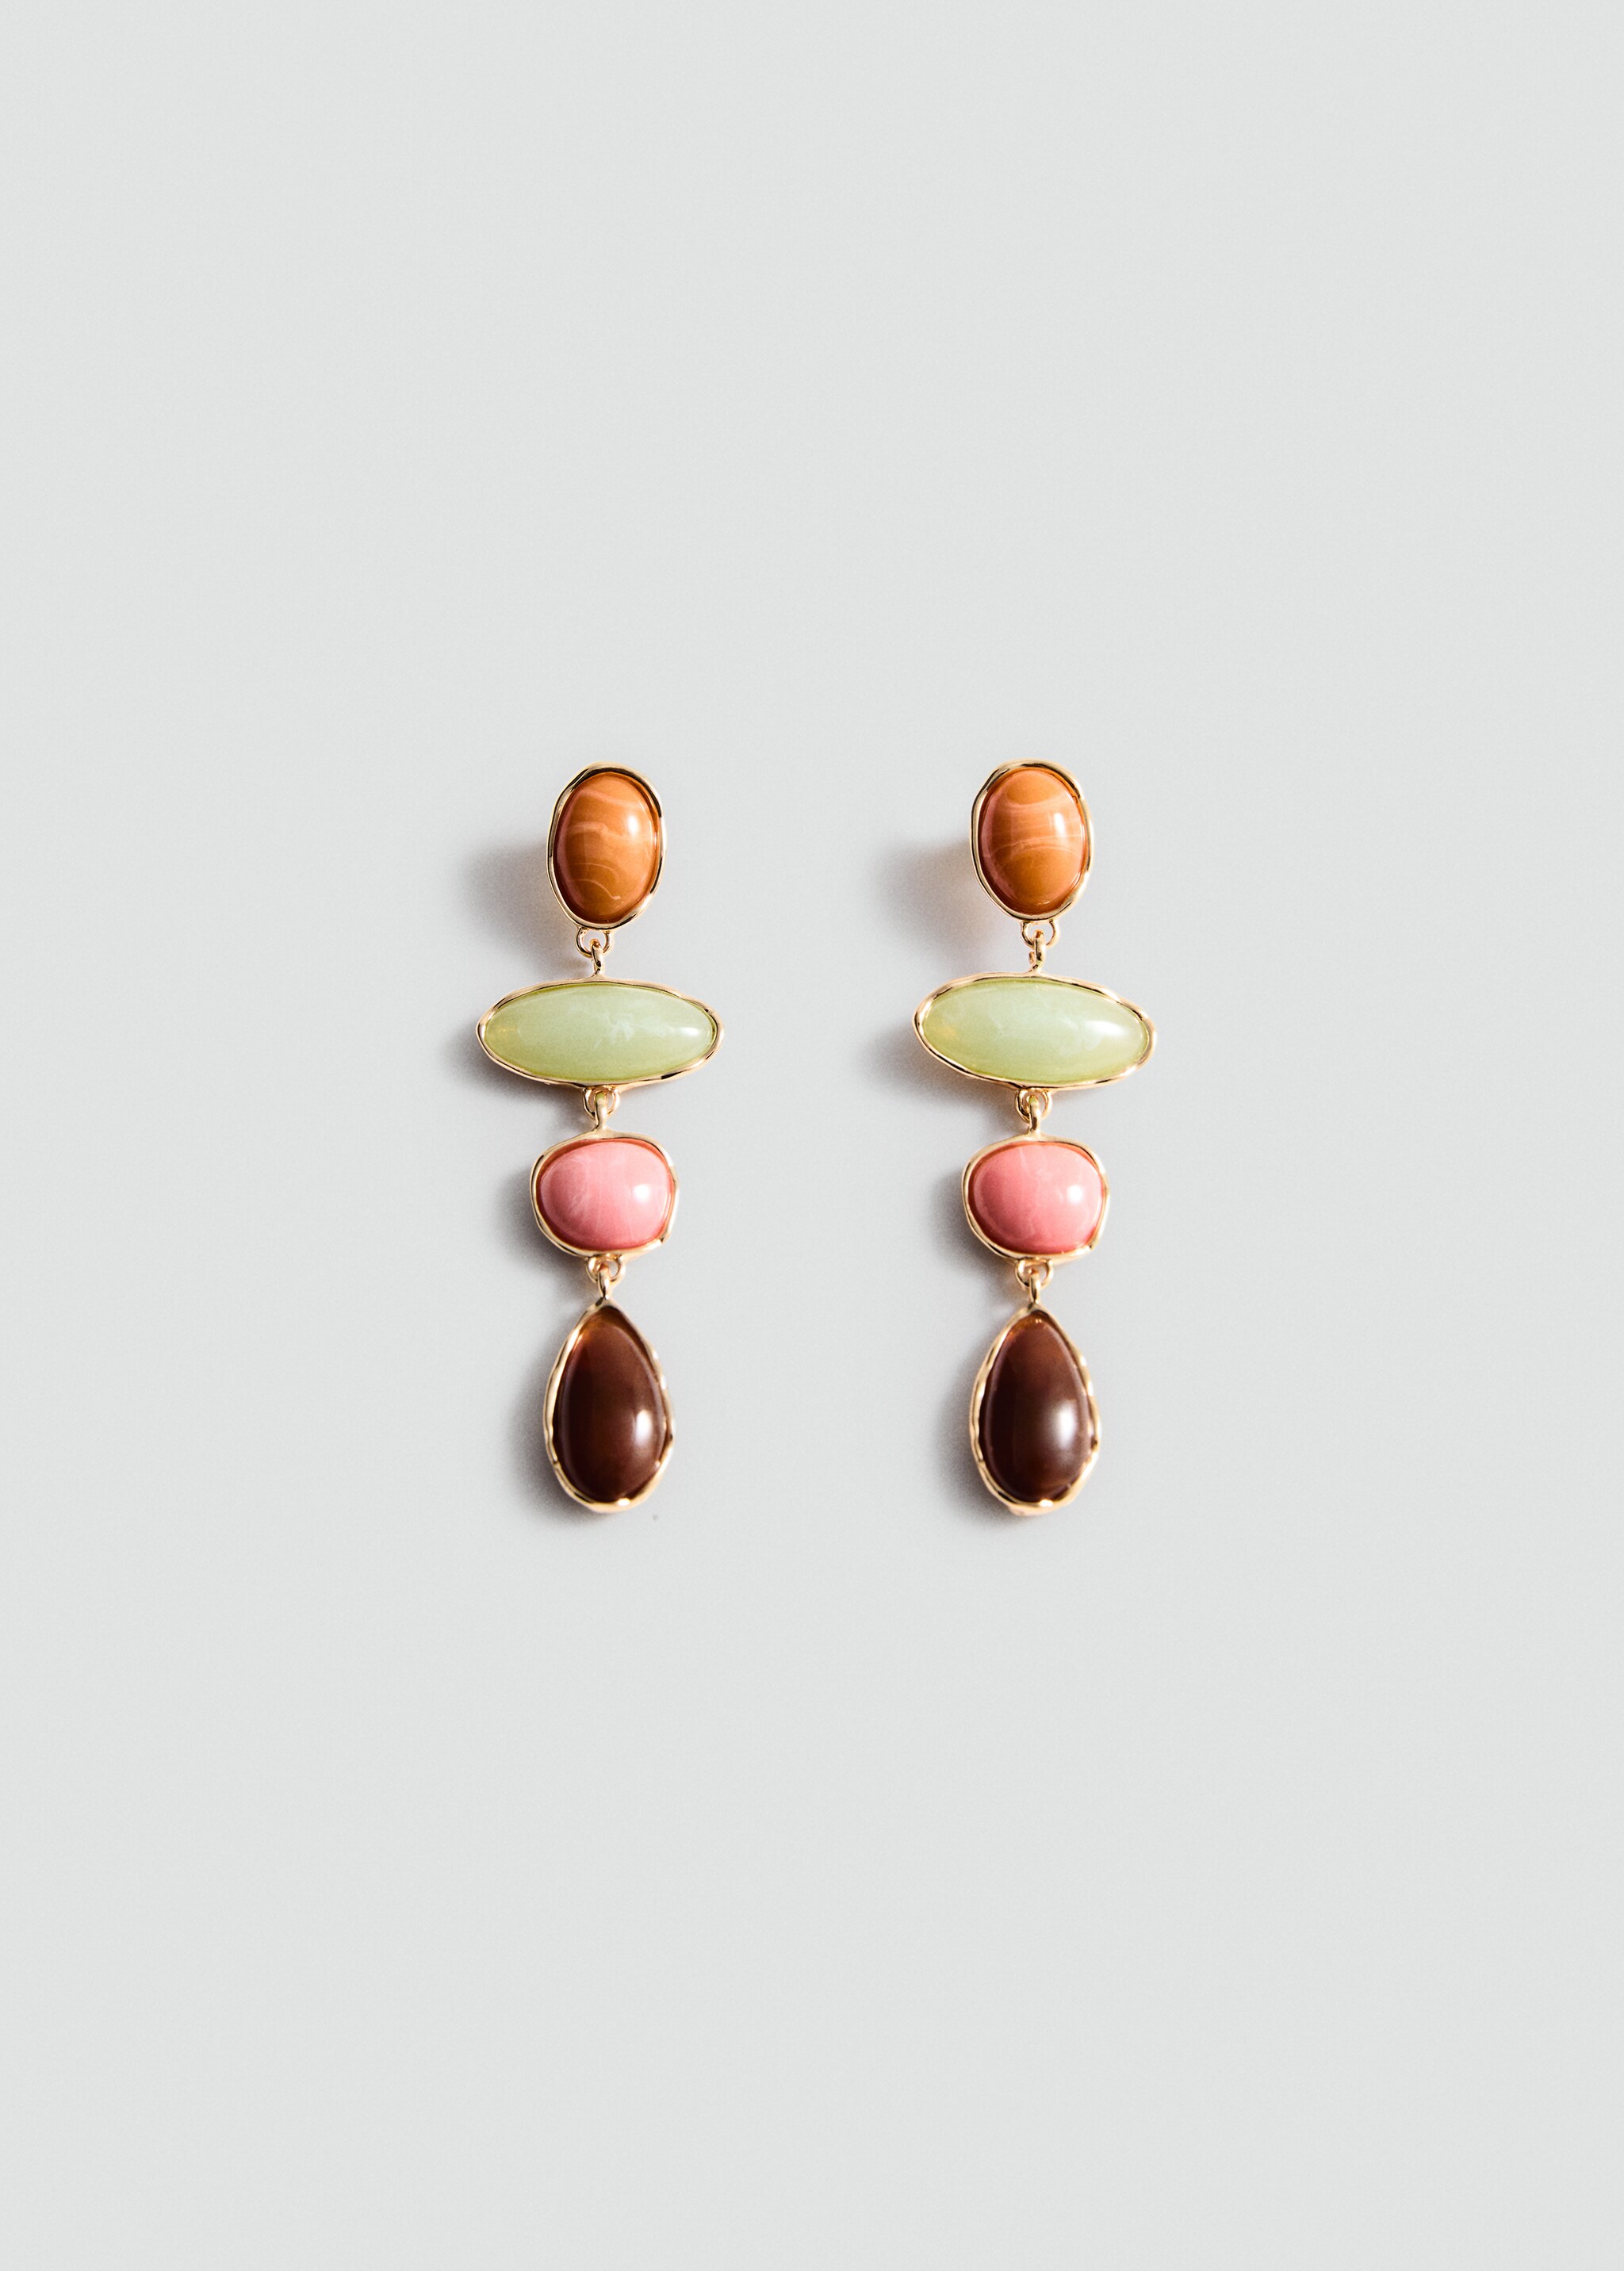 Stone pendant earrings - Article without model